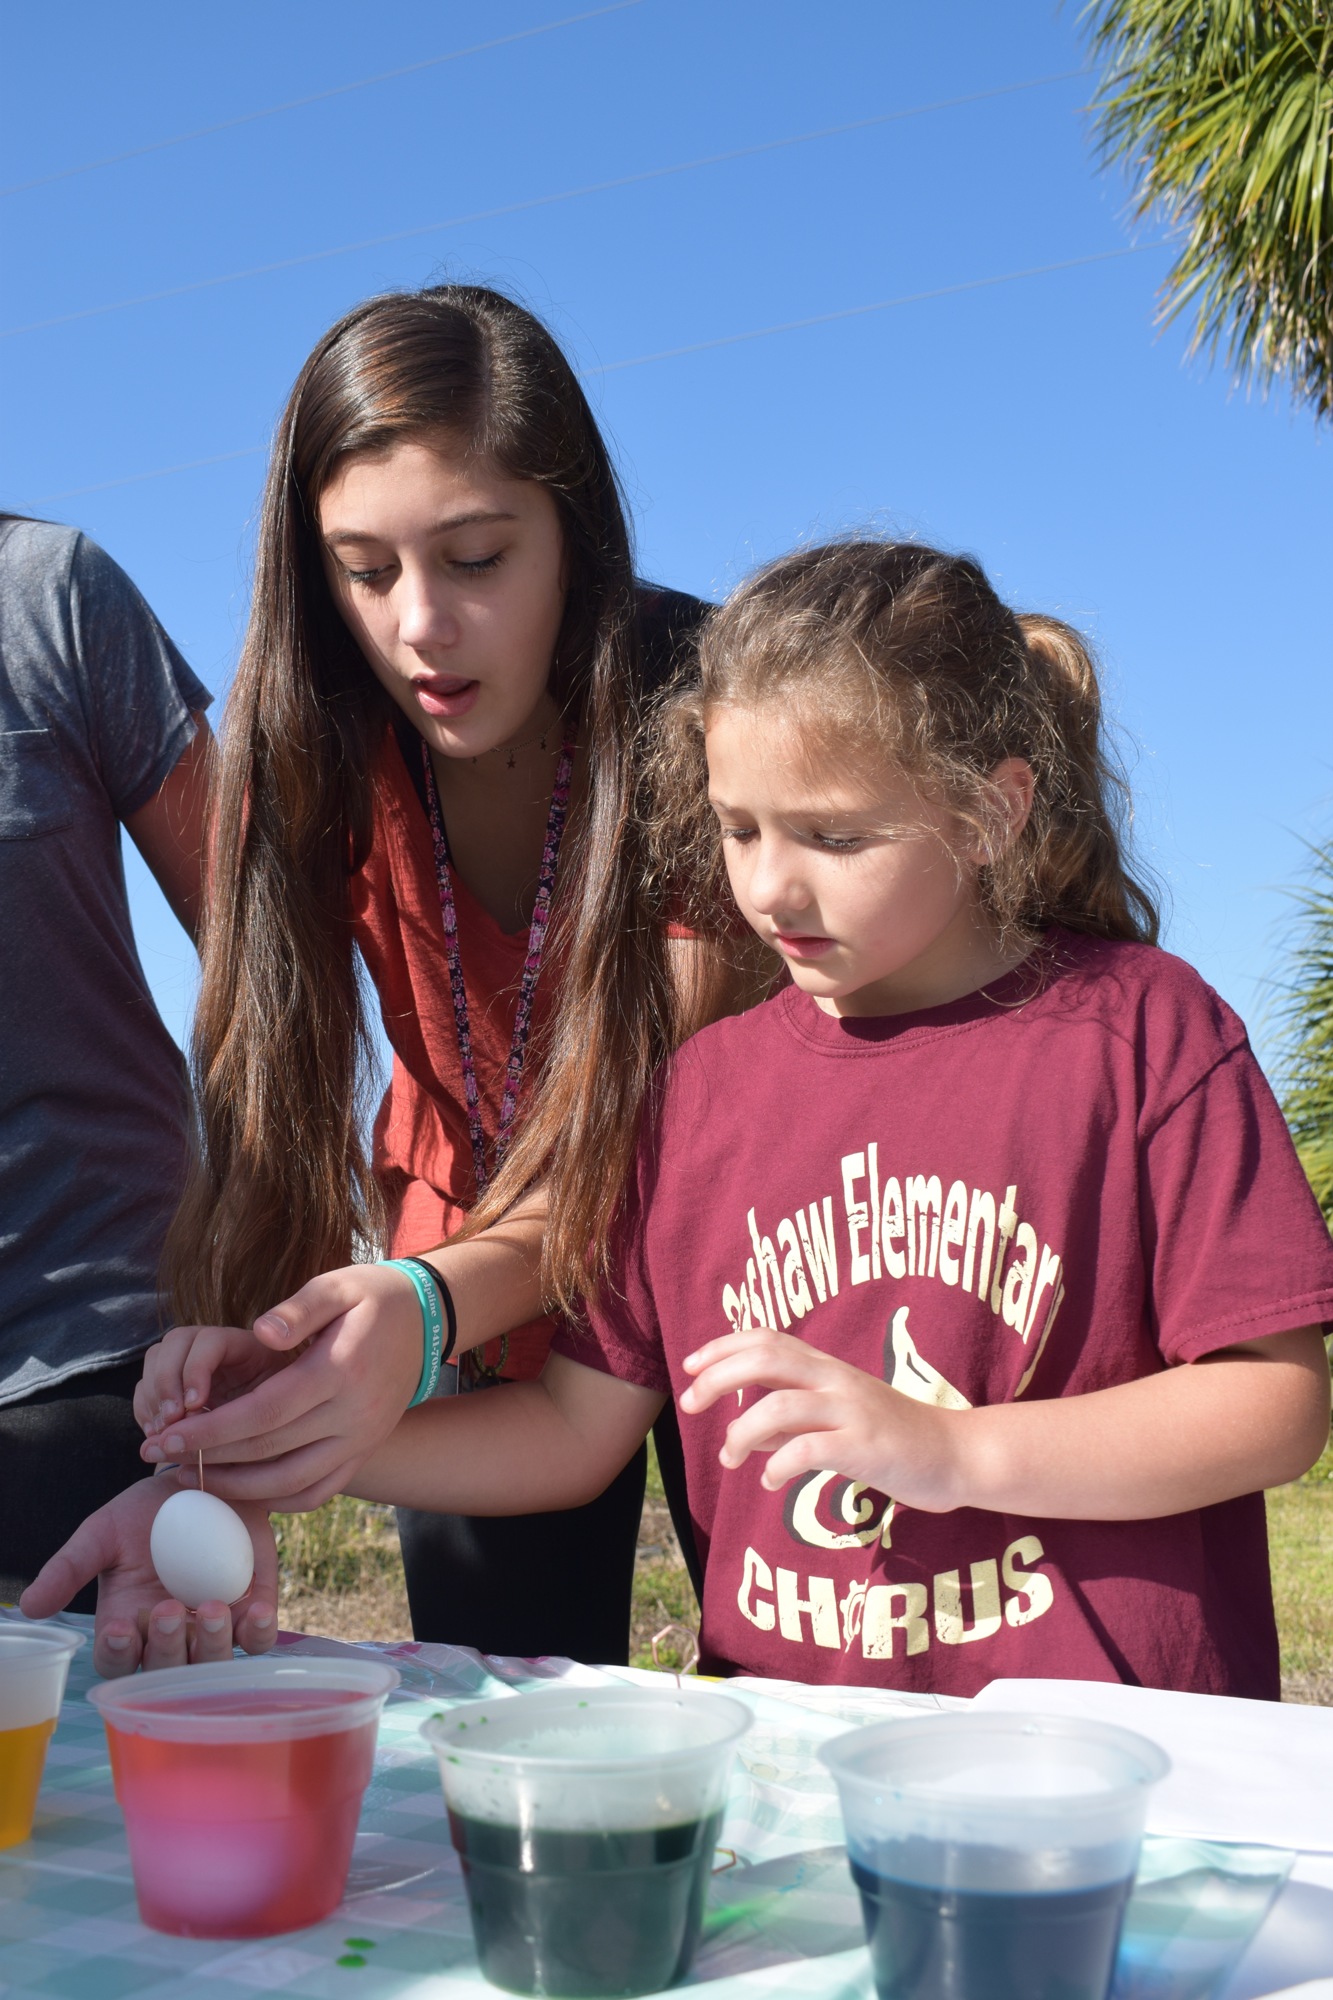 Kenley Greenleaf, a sophomore at Braden River High School, helps Cayleigh Greer, a fourth grader at William H. Bashaw Elementary School, dye an egg during an event last year. File photo.